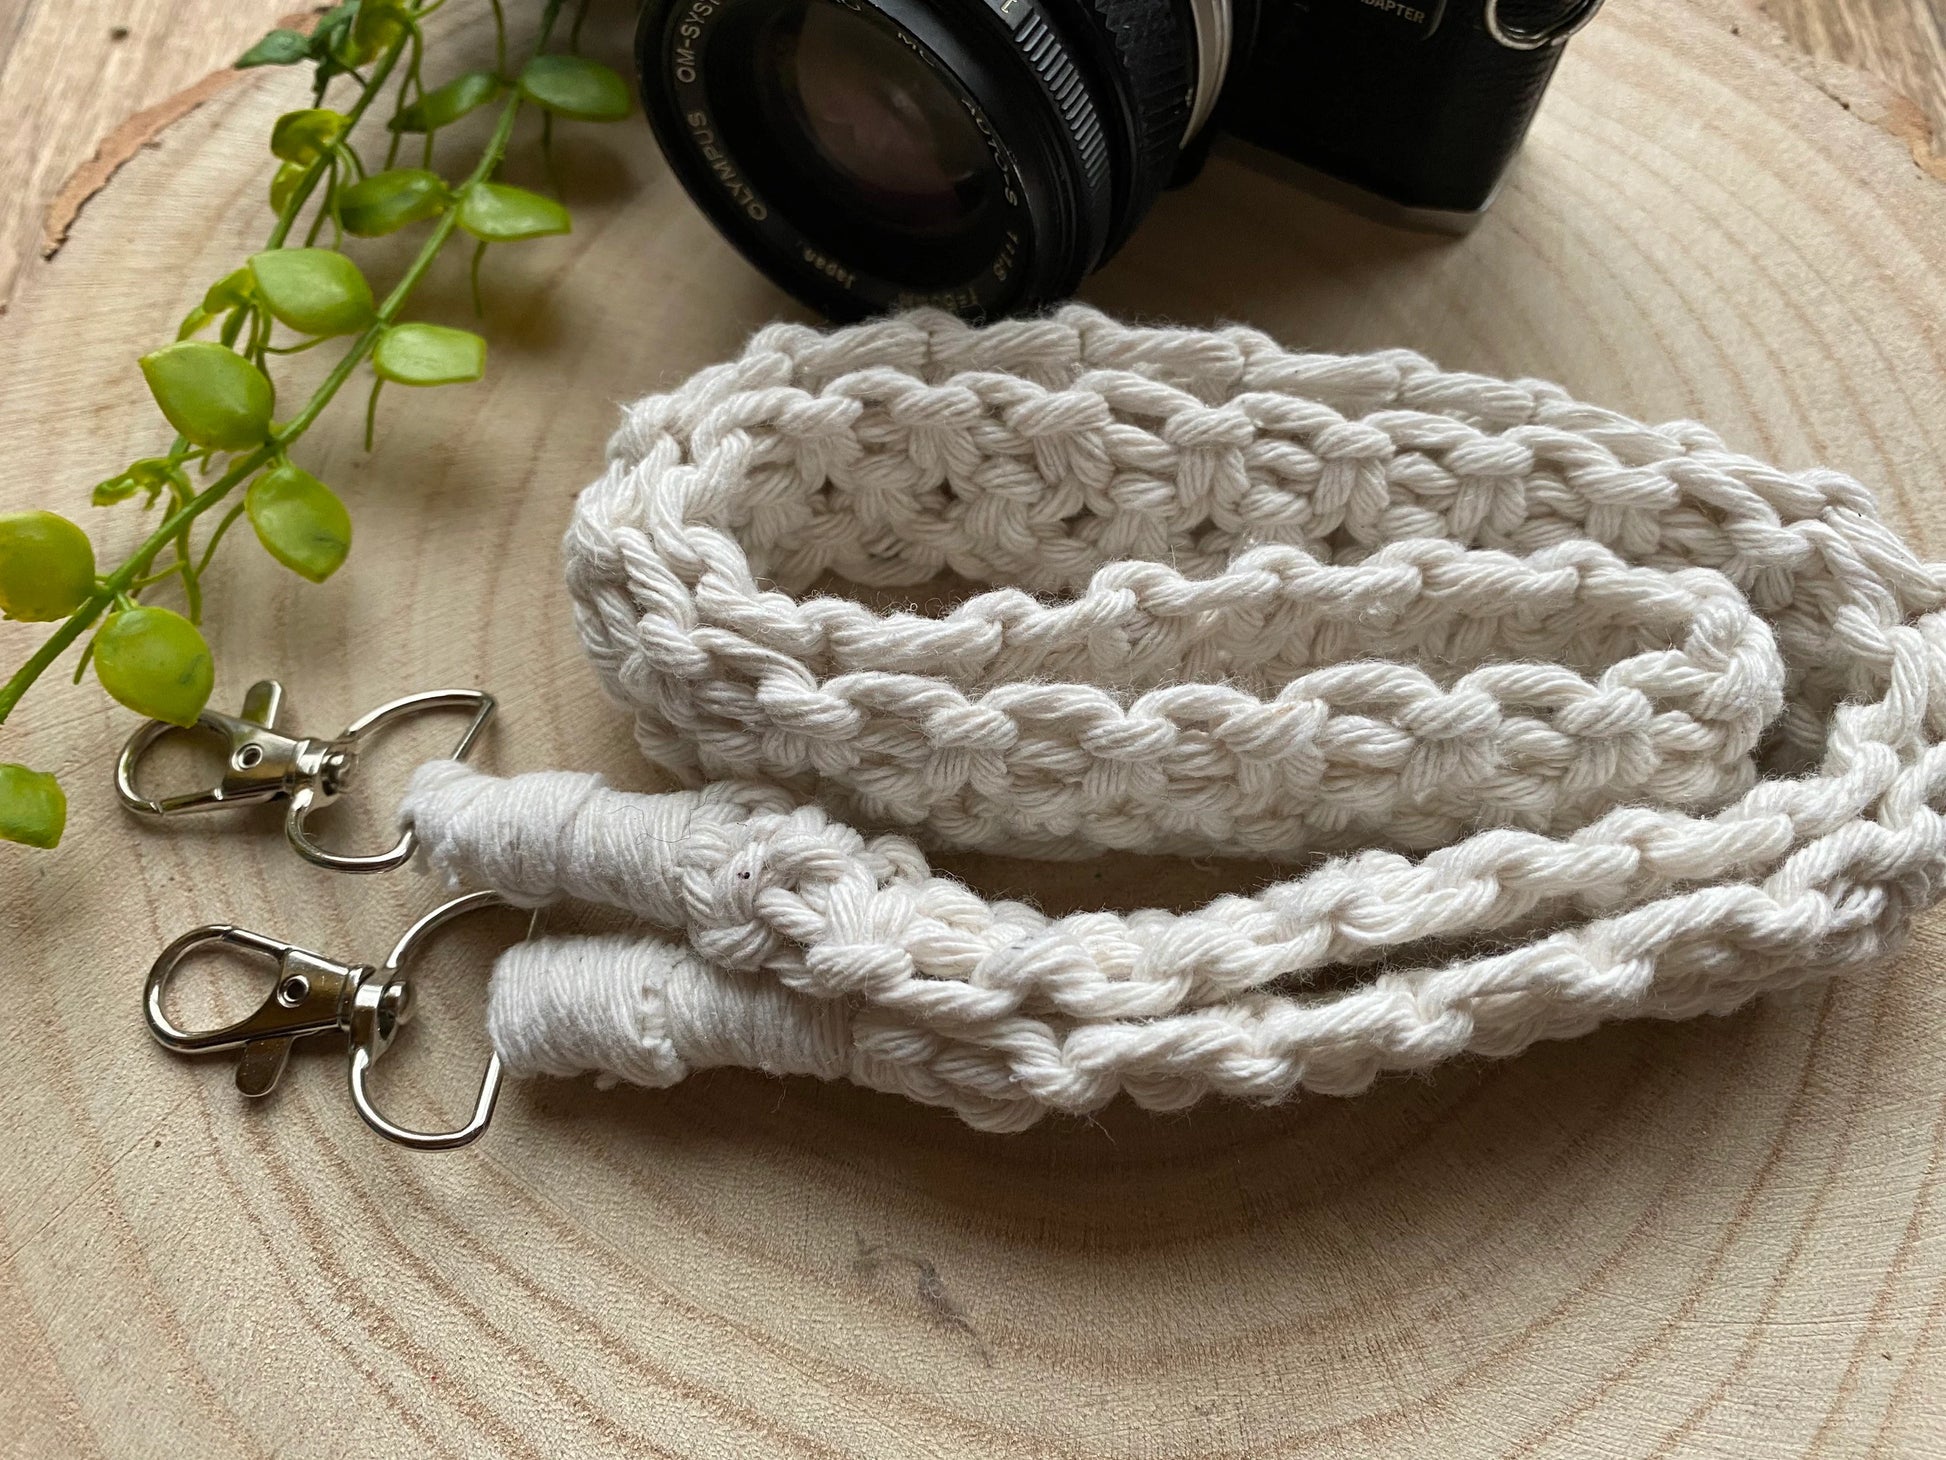  Macrame off white camera strap Woven natural cotton rope  shoulder strap Gift with hearts for traveler and photographer : Handmade  Products